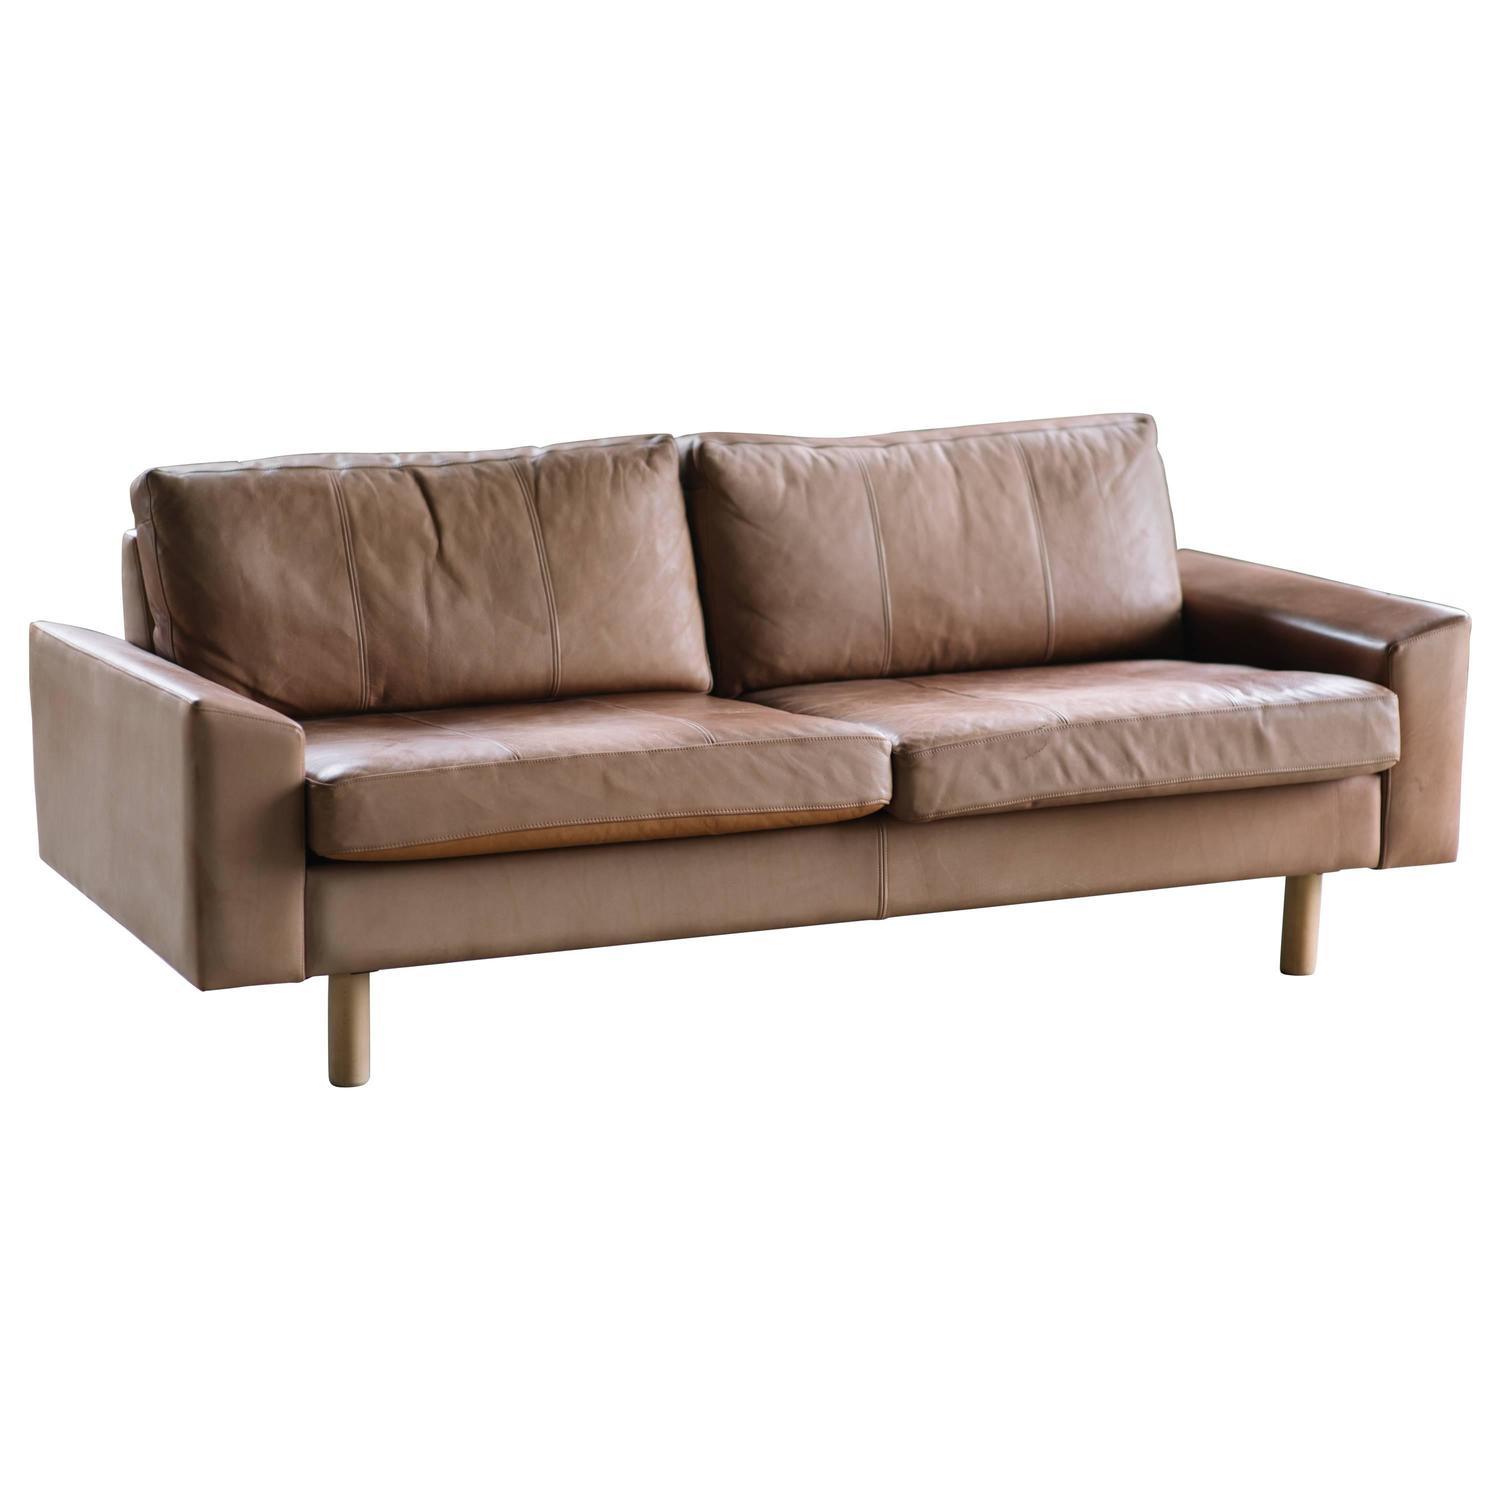 Leather Sofa by Illums Bolighus with Tan / Sand Colored Leather and Wooden  Legs at 1stDibs